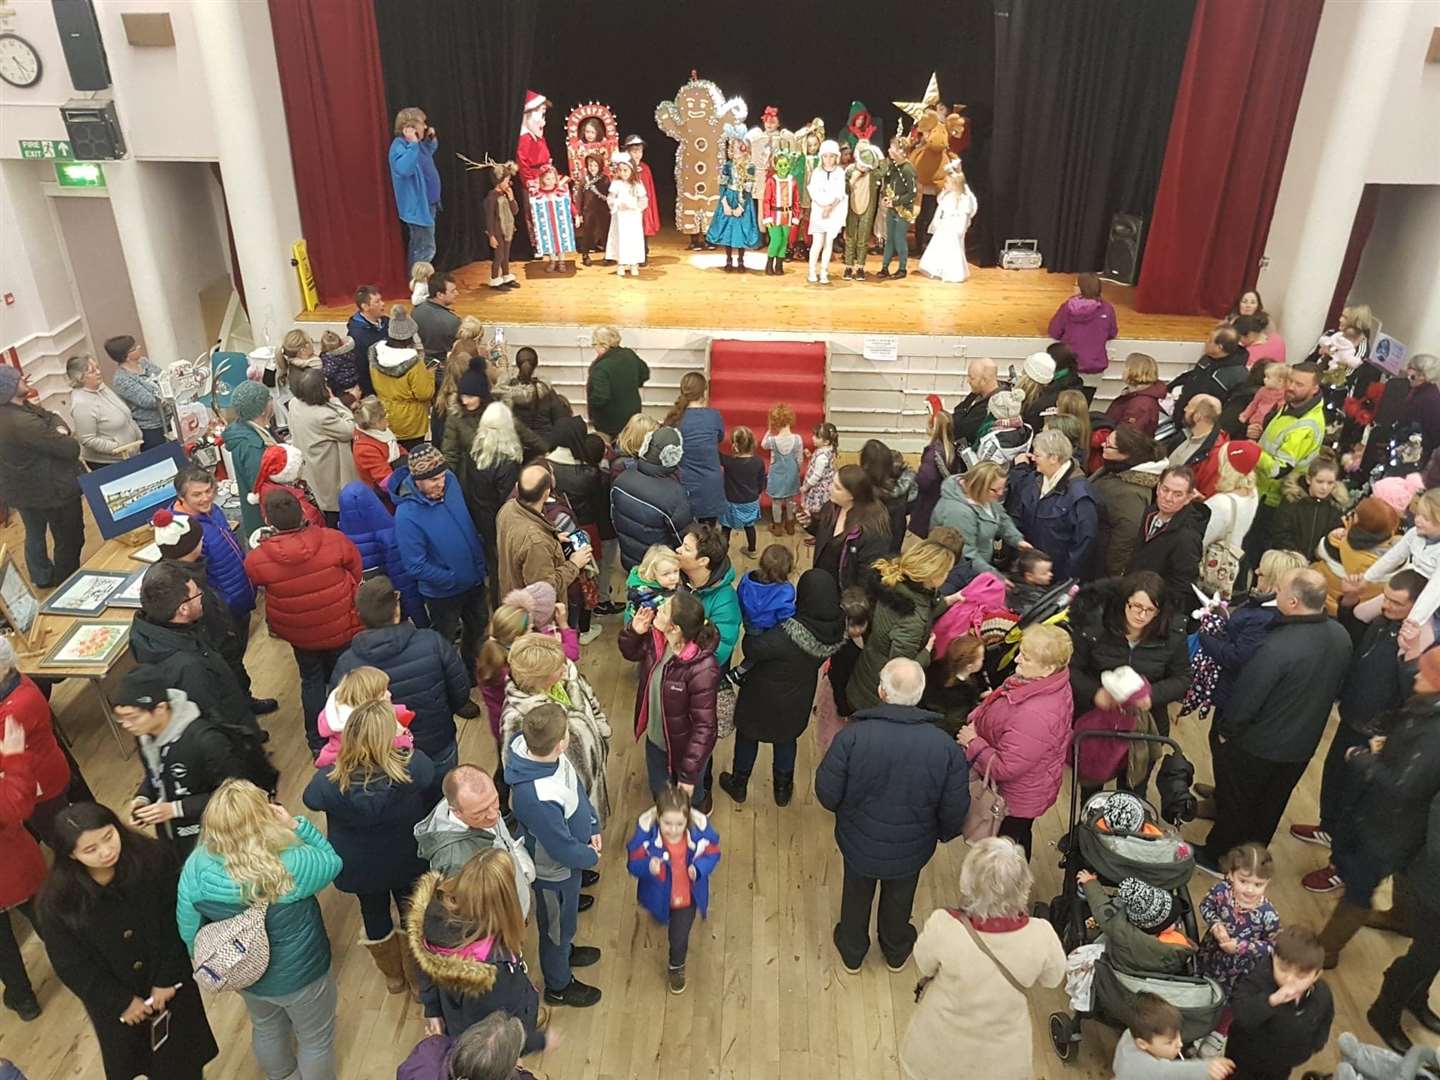 The costume competition entrants gathering on the stage ahead of judging by Santa.